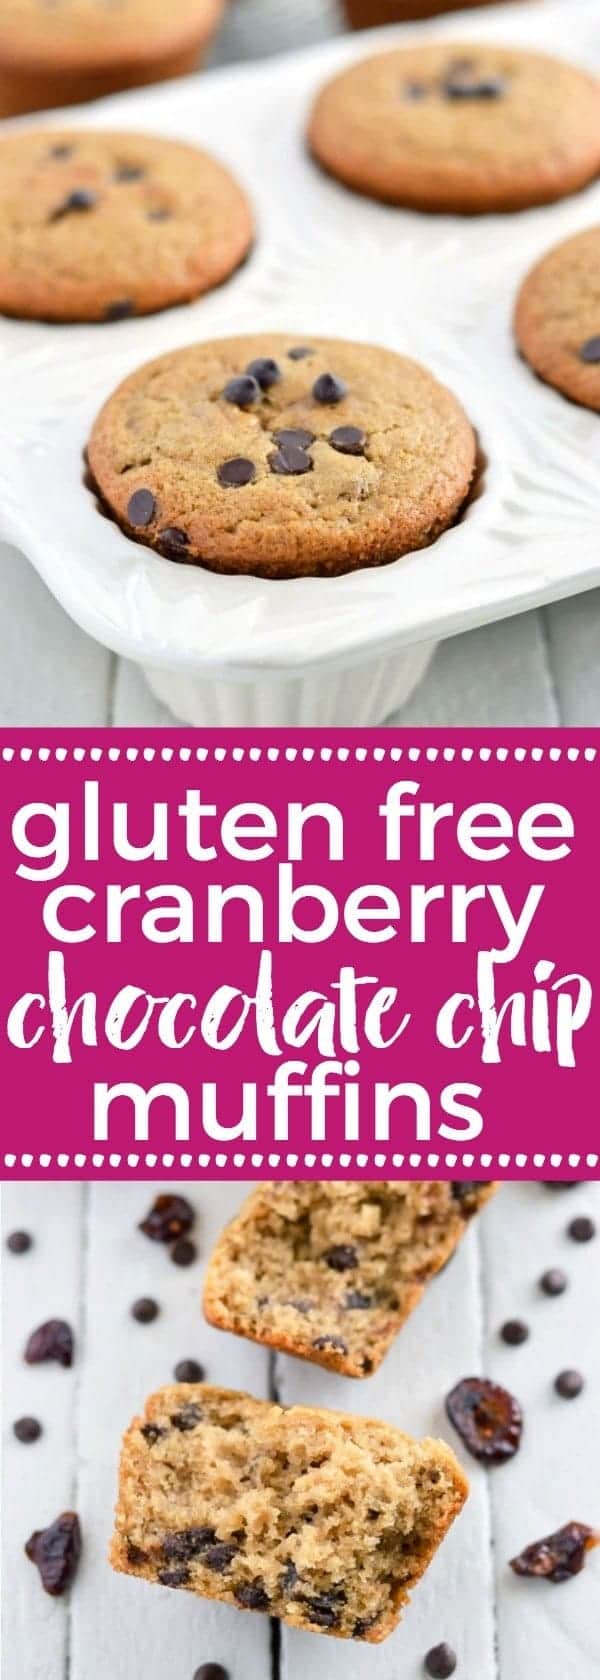 Gluten Free Cranberry Chocolate Chip Muffins - nut free and vegan (top 8 free). Easy breakfast recipe from @whattheforkblog | whattheforkfoodblog.com | gluten free breakfast recipes | gluten free muffins | vegan recipes | allergy-friendly | Christmas brunch ideas | easy breakfast ideas | gluten free baking | sponsored | muffin mix hack